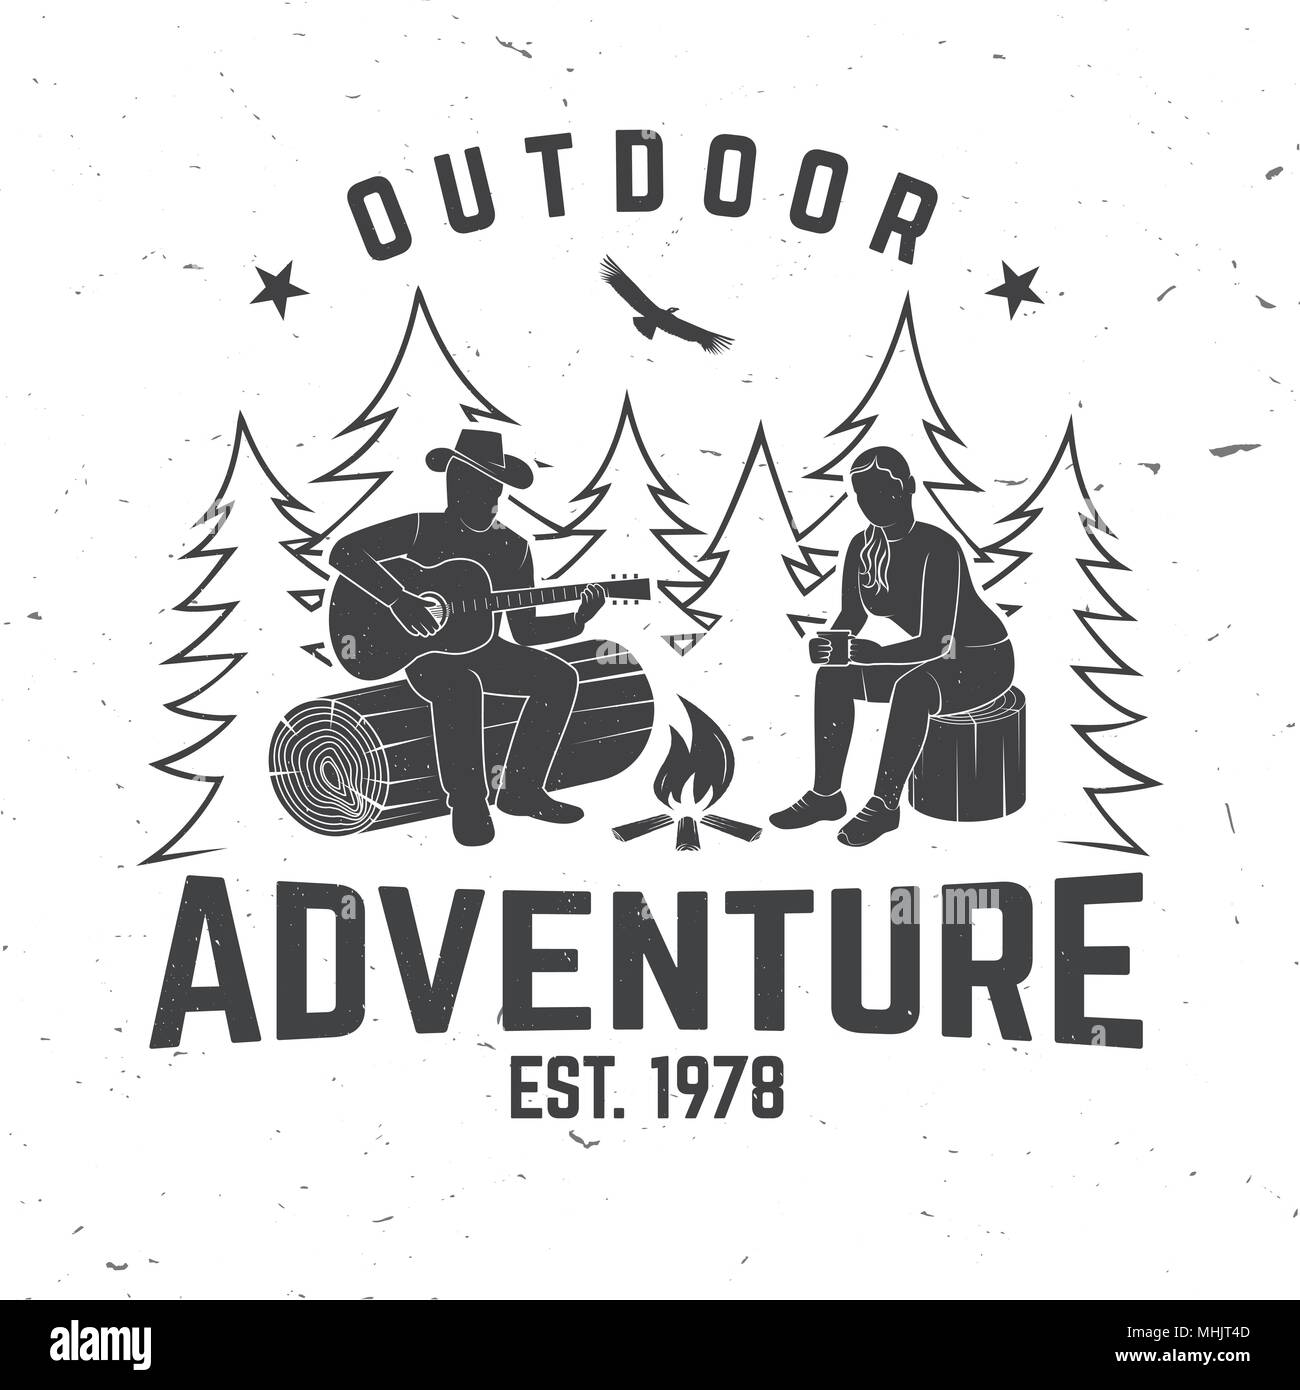 Outdoor adventure. Vector illustration. Concept for shirt or logo, print, stamp or tee. Stock Vector